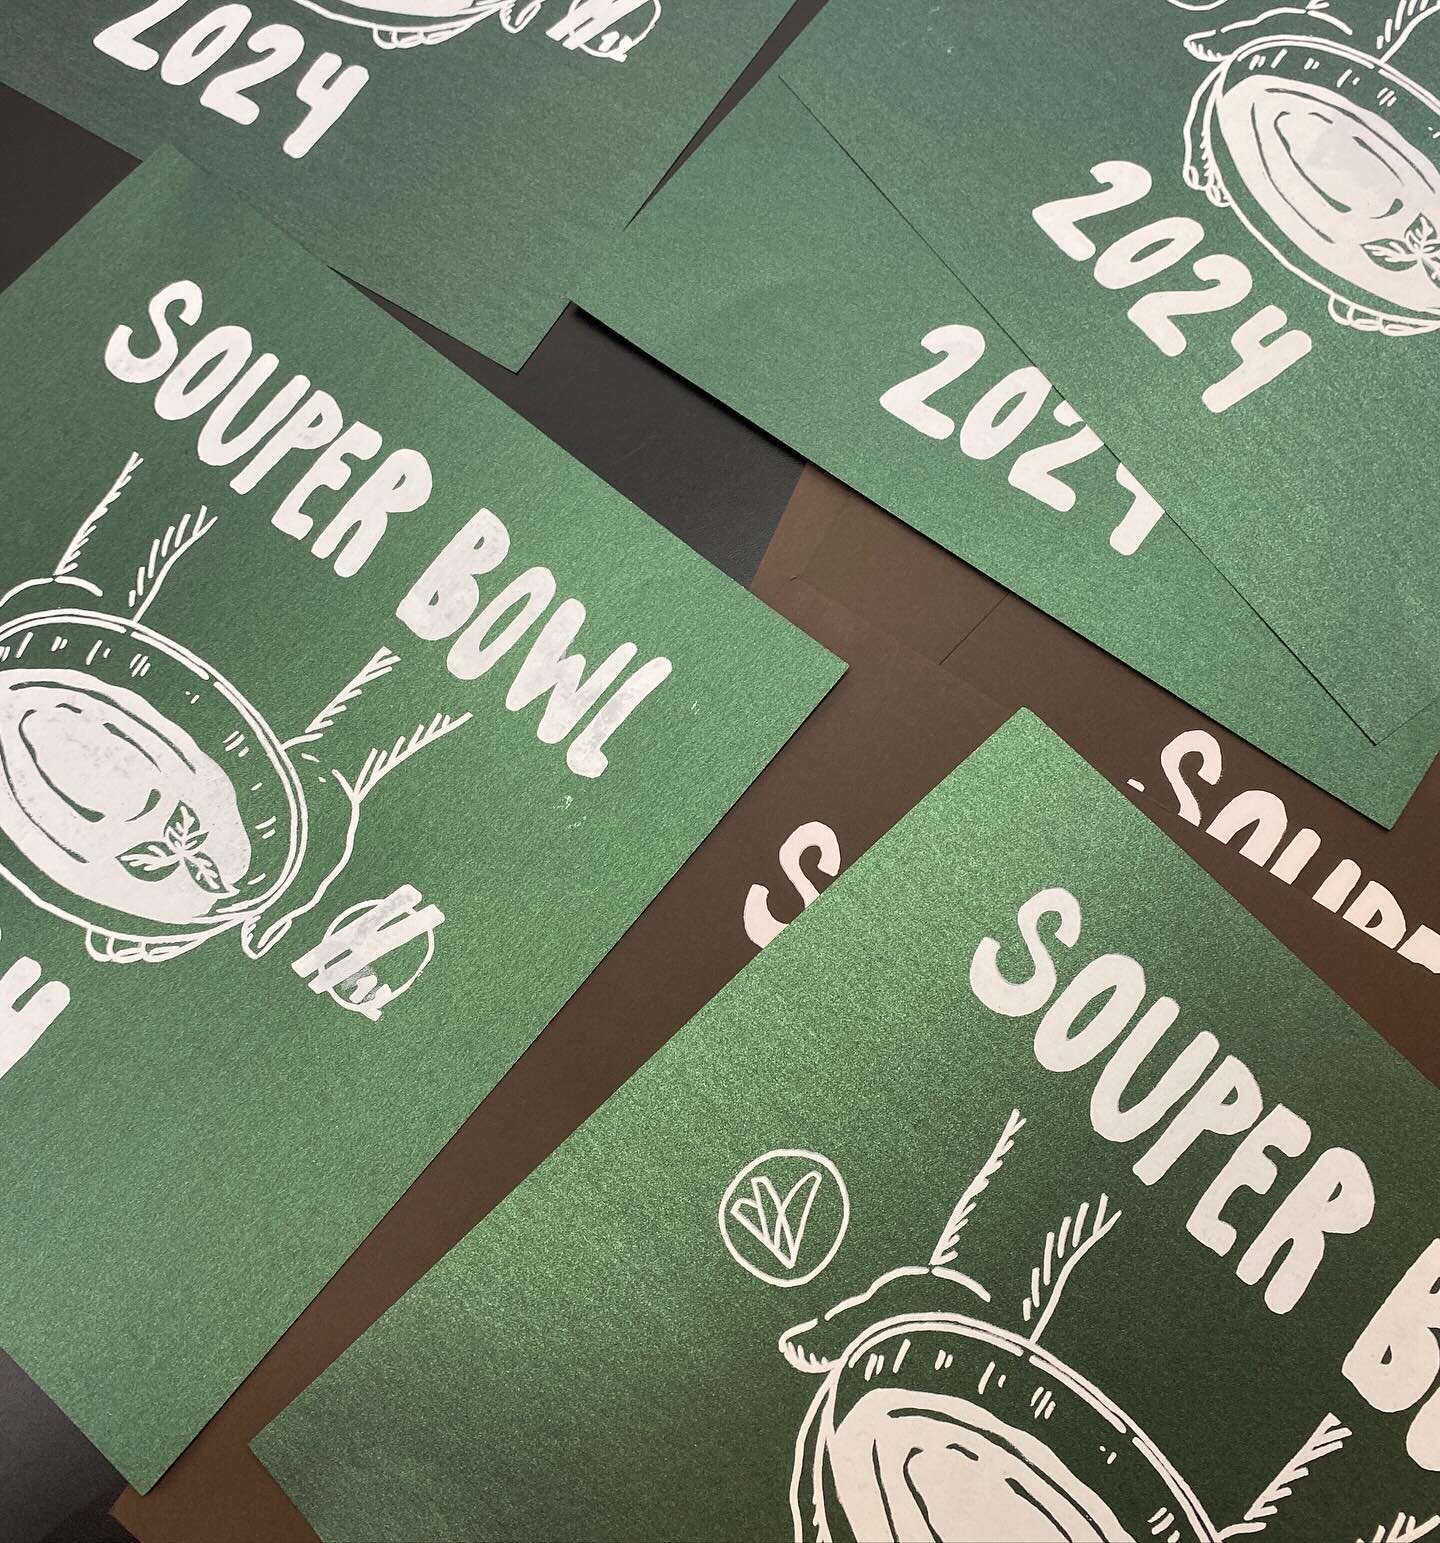 Souper Bowl was a huge success, with Hang12 selling out of totes before the event was even over! Bleached totes and the cat design were crowd favs!🎨🎨

And, we # hope to have more bring your own stuff printing in the future!